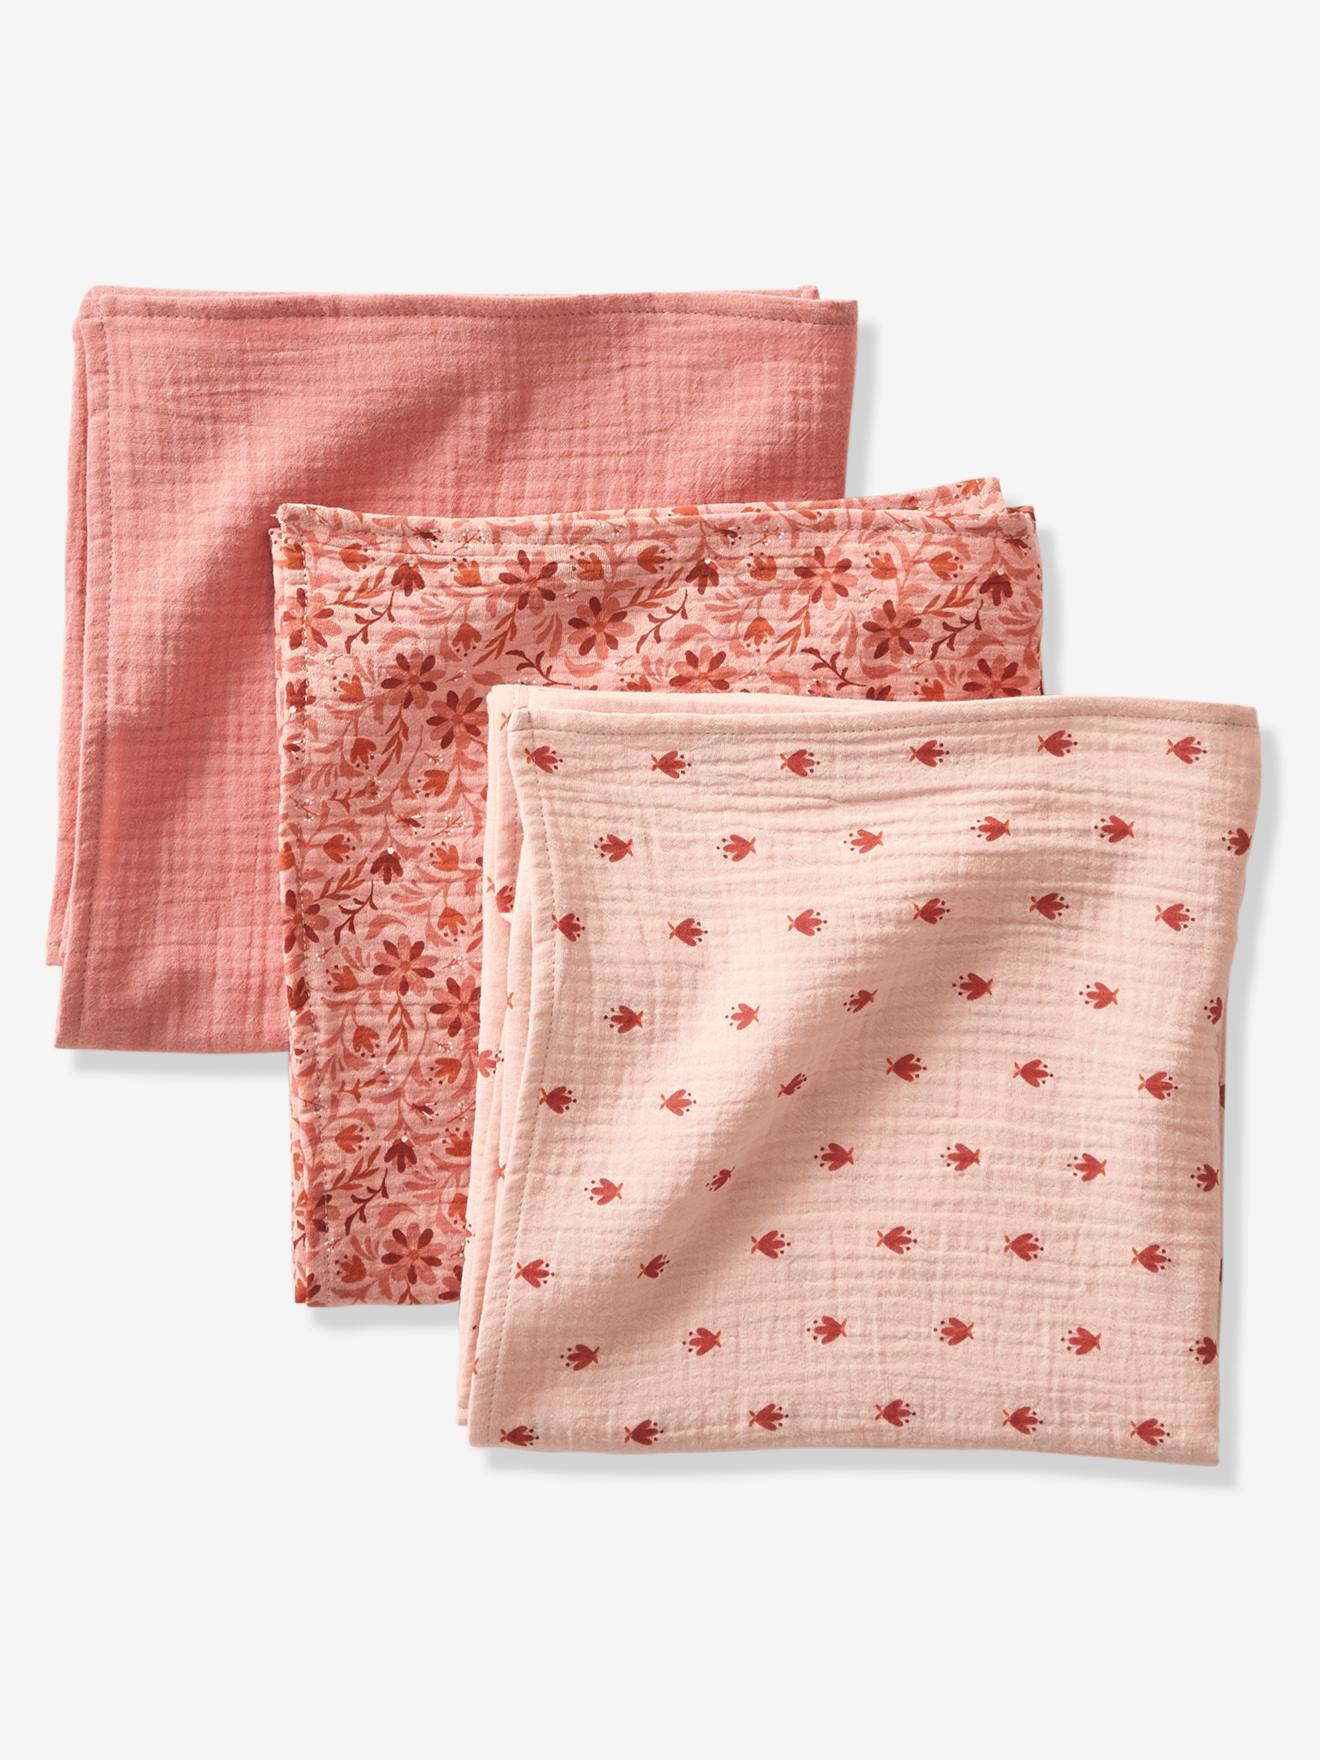 Pack of 3 Muslin Squares in Cotton Gauze, by BEBE BOHEME pink